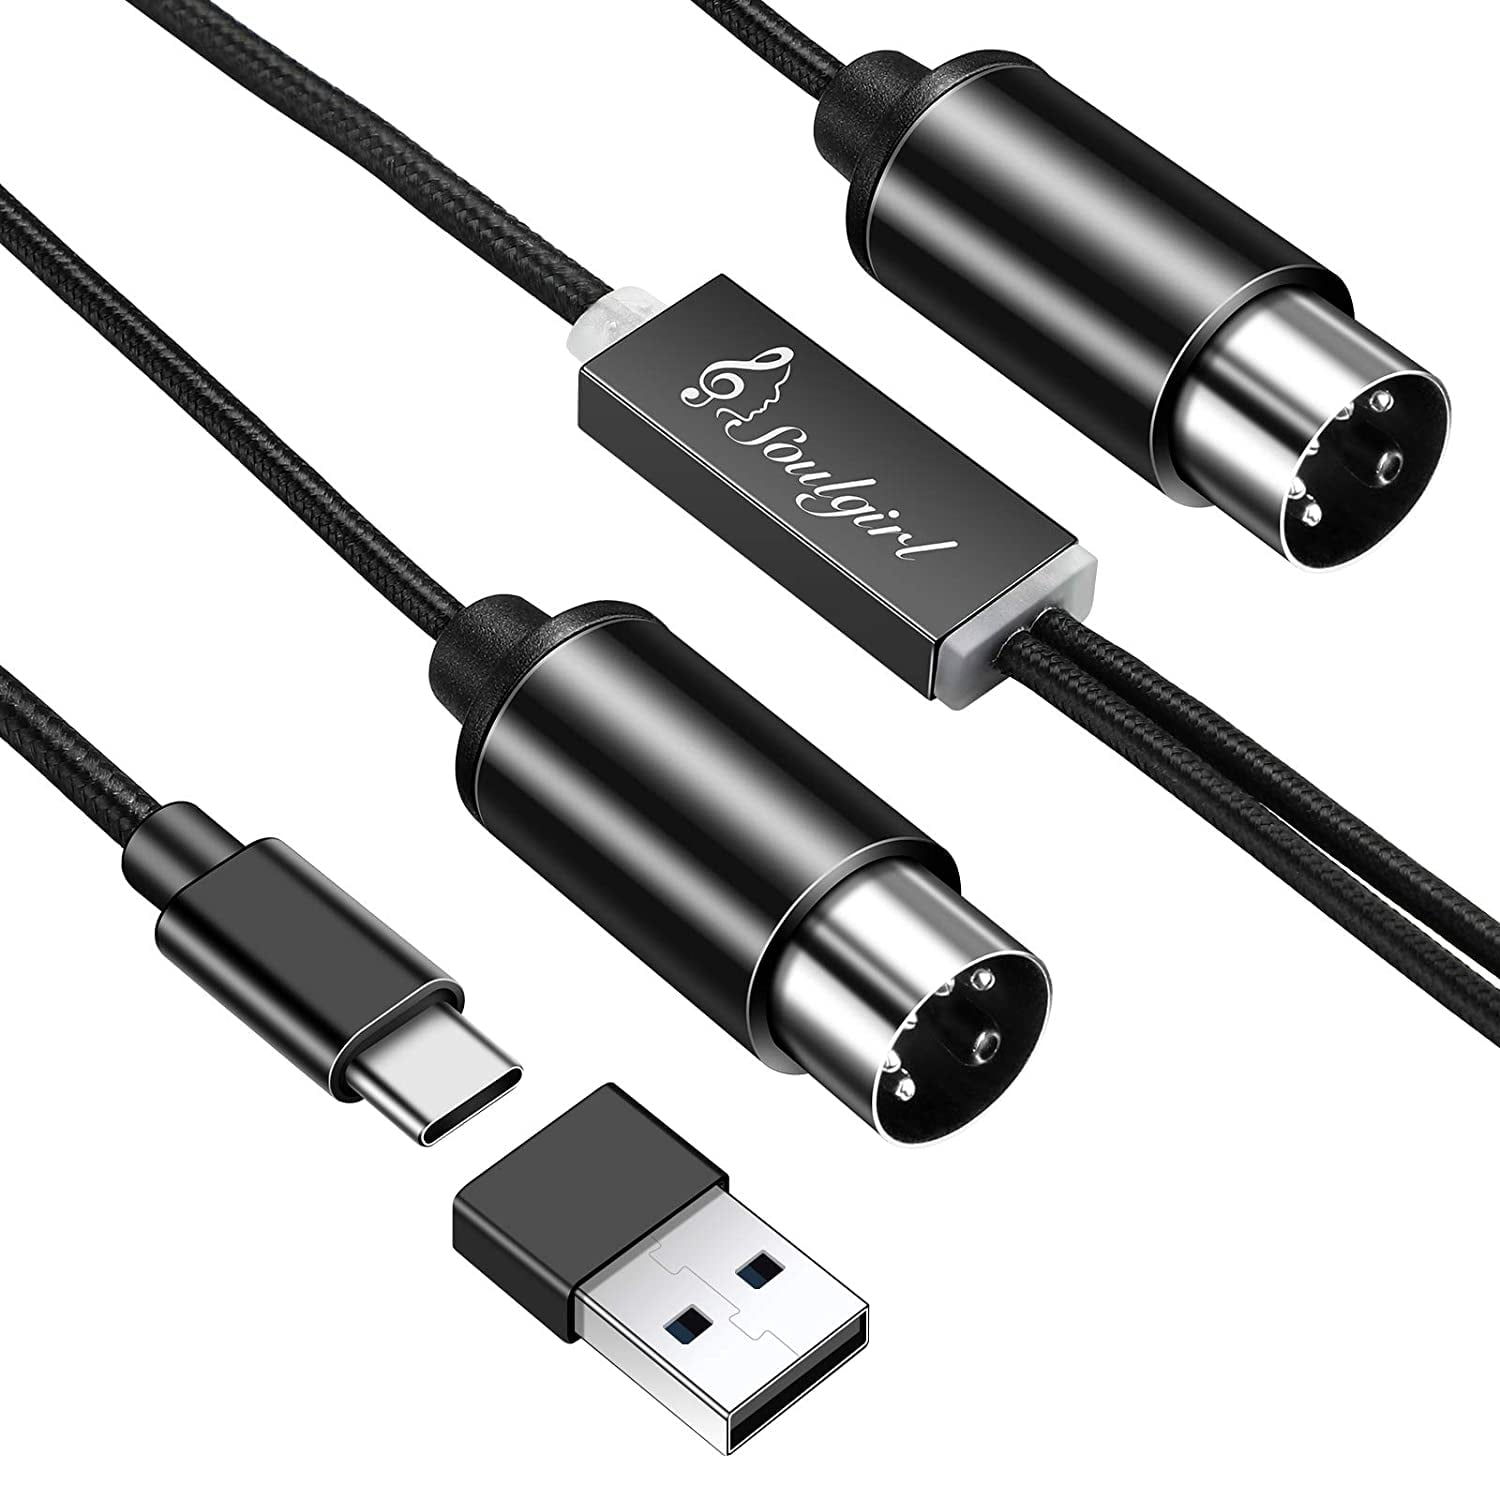 MIDI USB/USB C Interface MIDI Cable Adapter with Input&Output Connecting with Keyboard/Synthesizer for Editing&Recording Track Work with Windows/Mac OS for Studio 2.0-6Ft | Walmart Canada